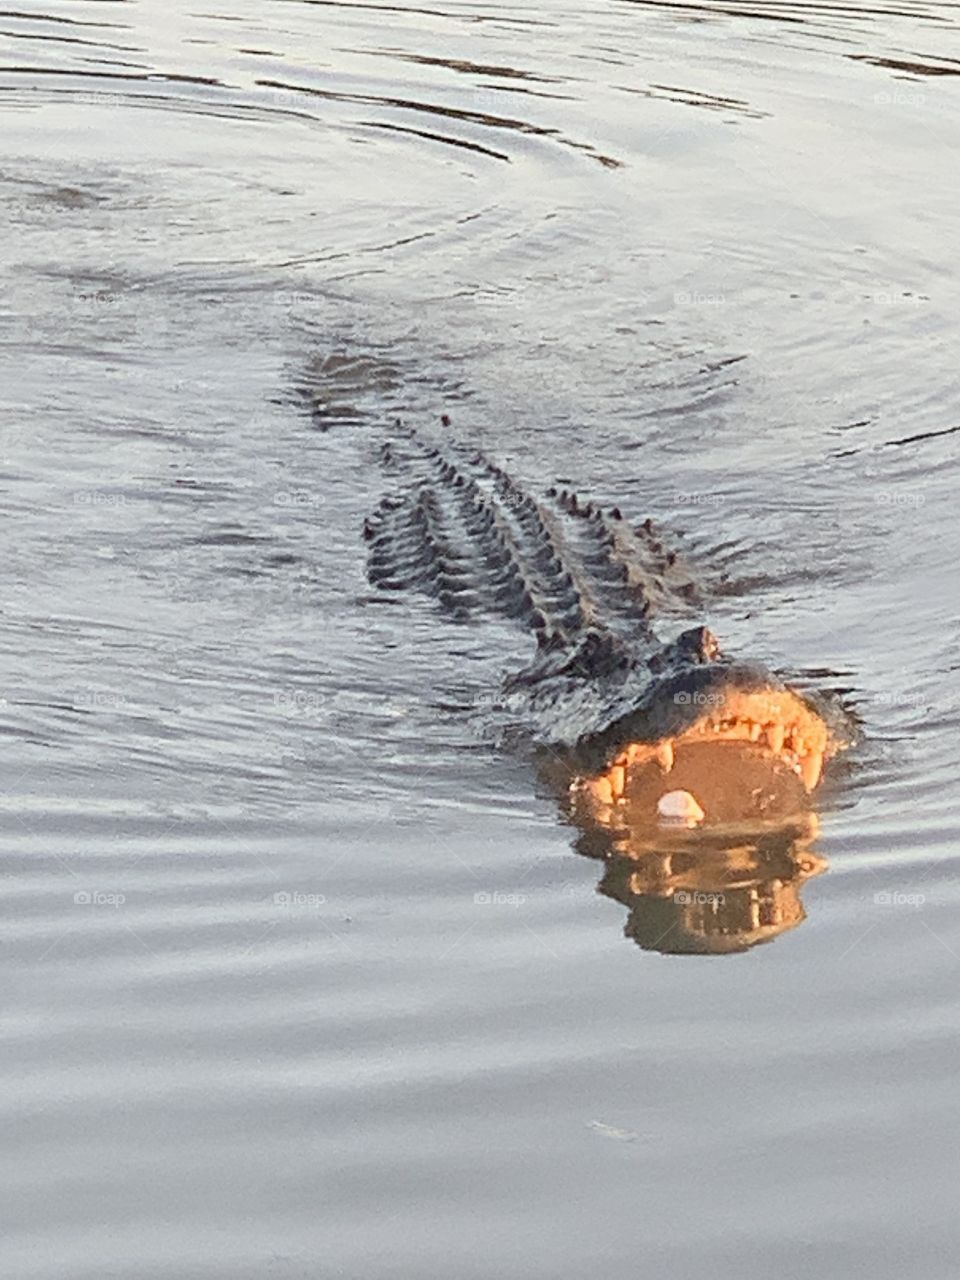 If you feed an alligator marshmallows 